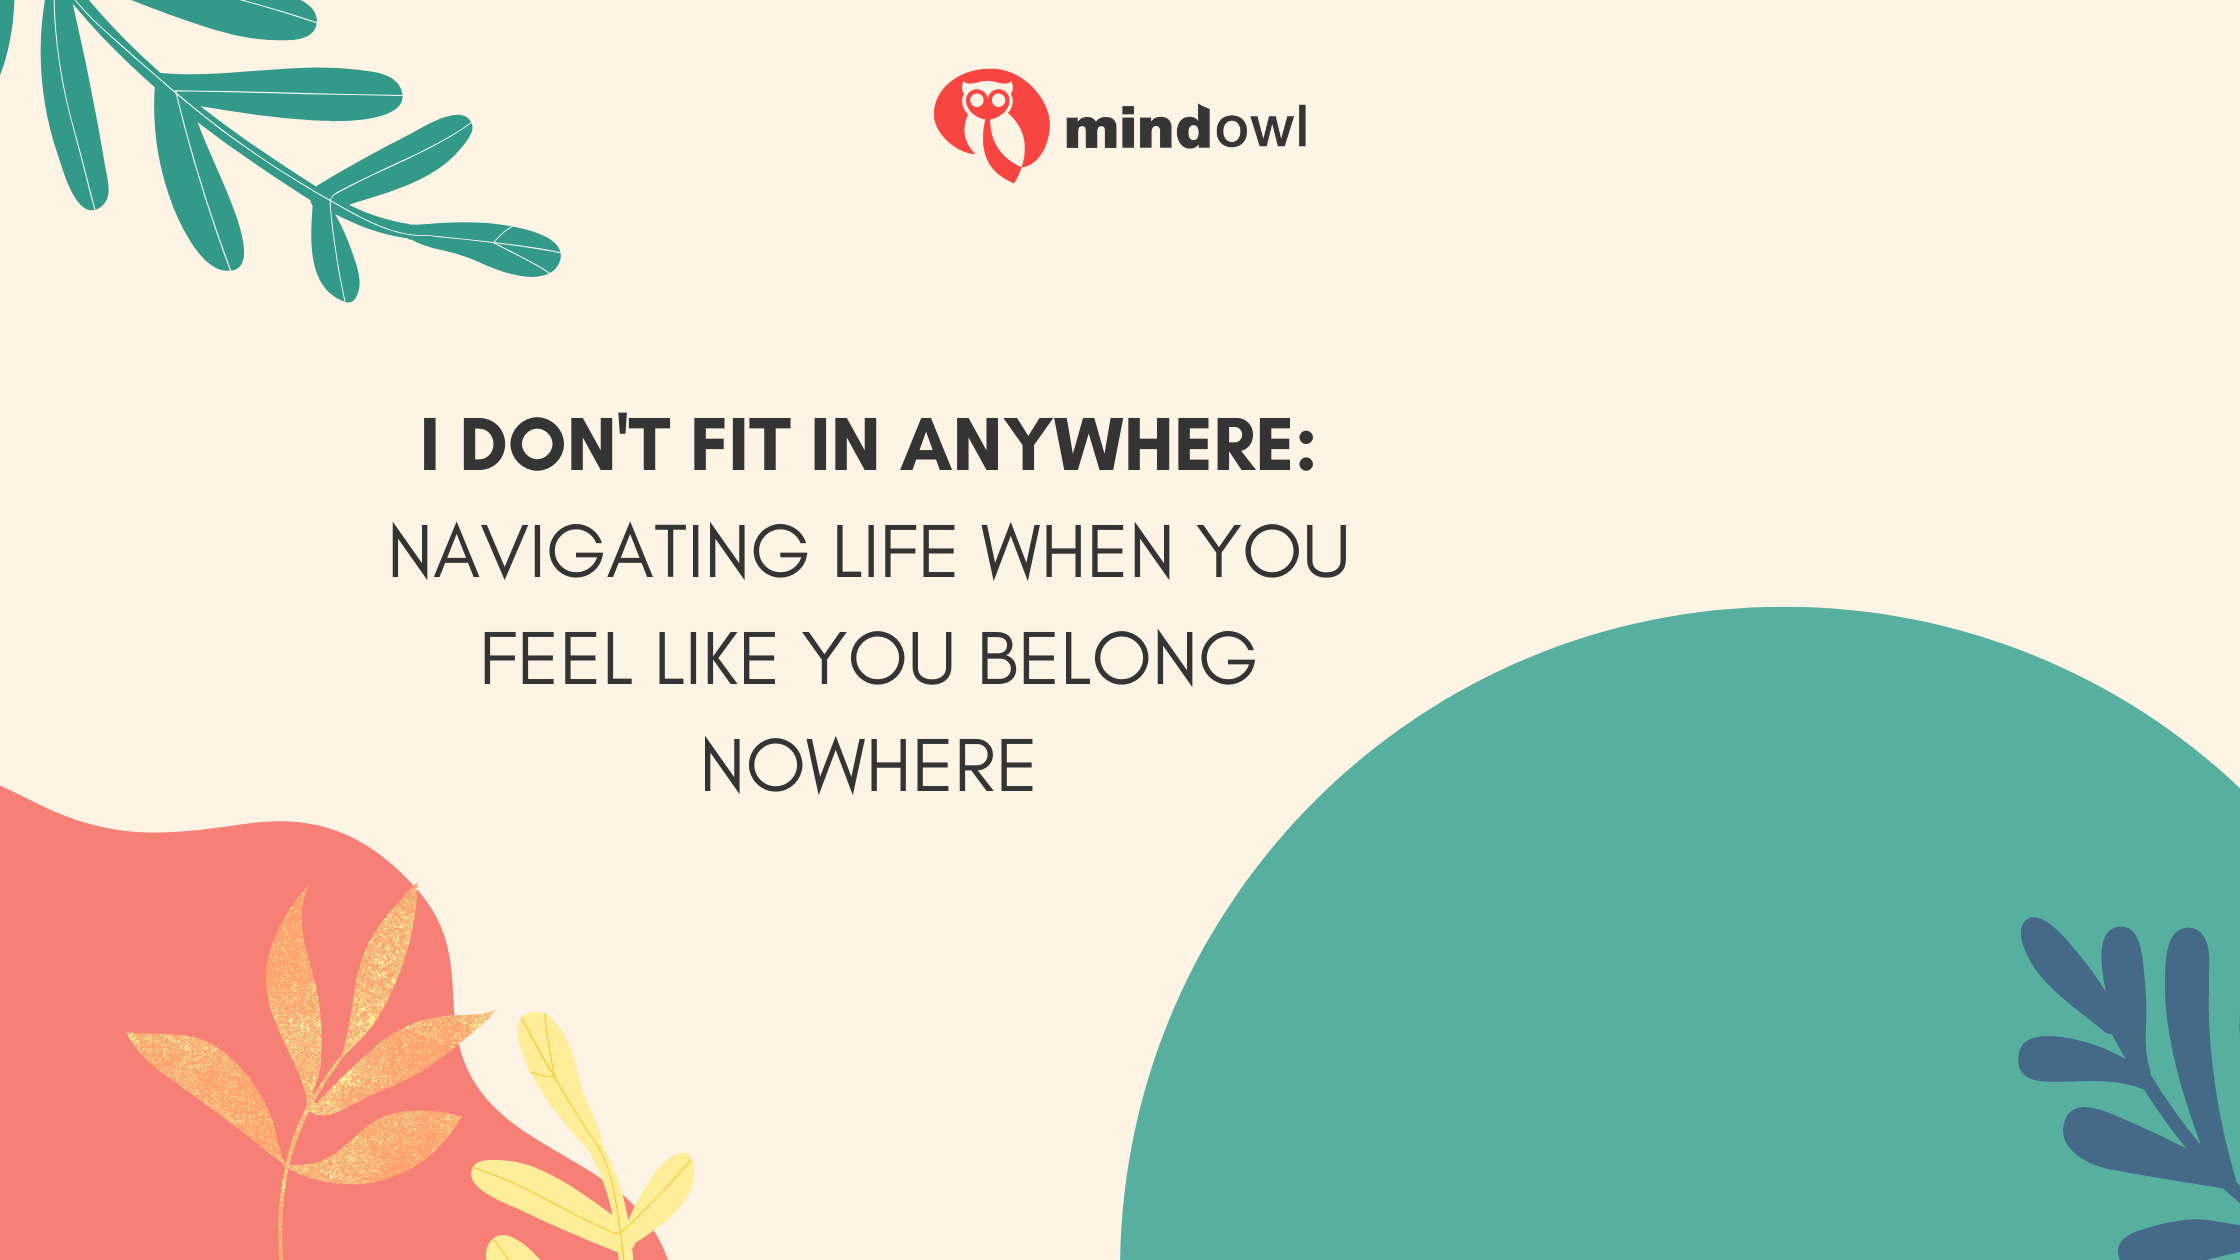 I Don’t Fit In Anywhere: Navigating Life When You Feel Like You Belong Nowhere